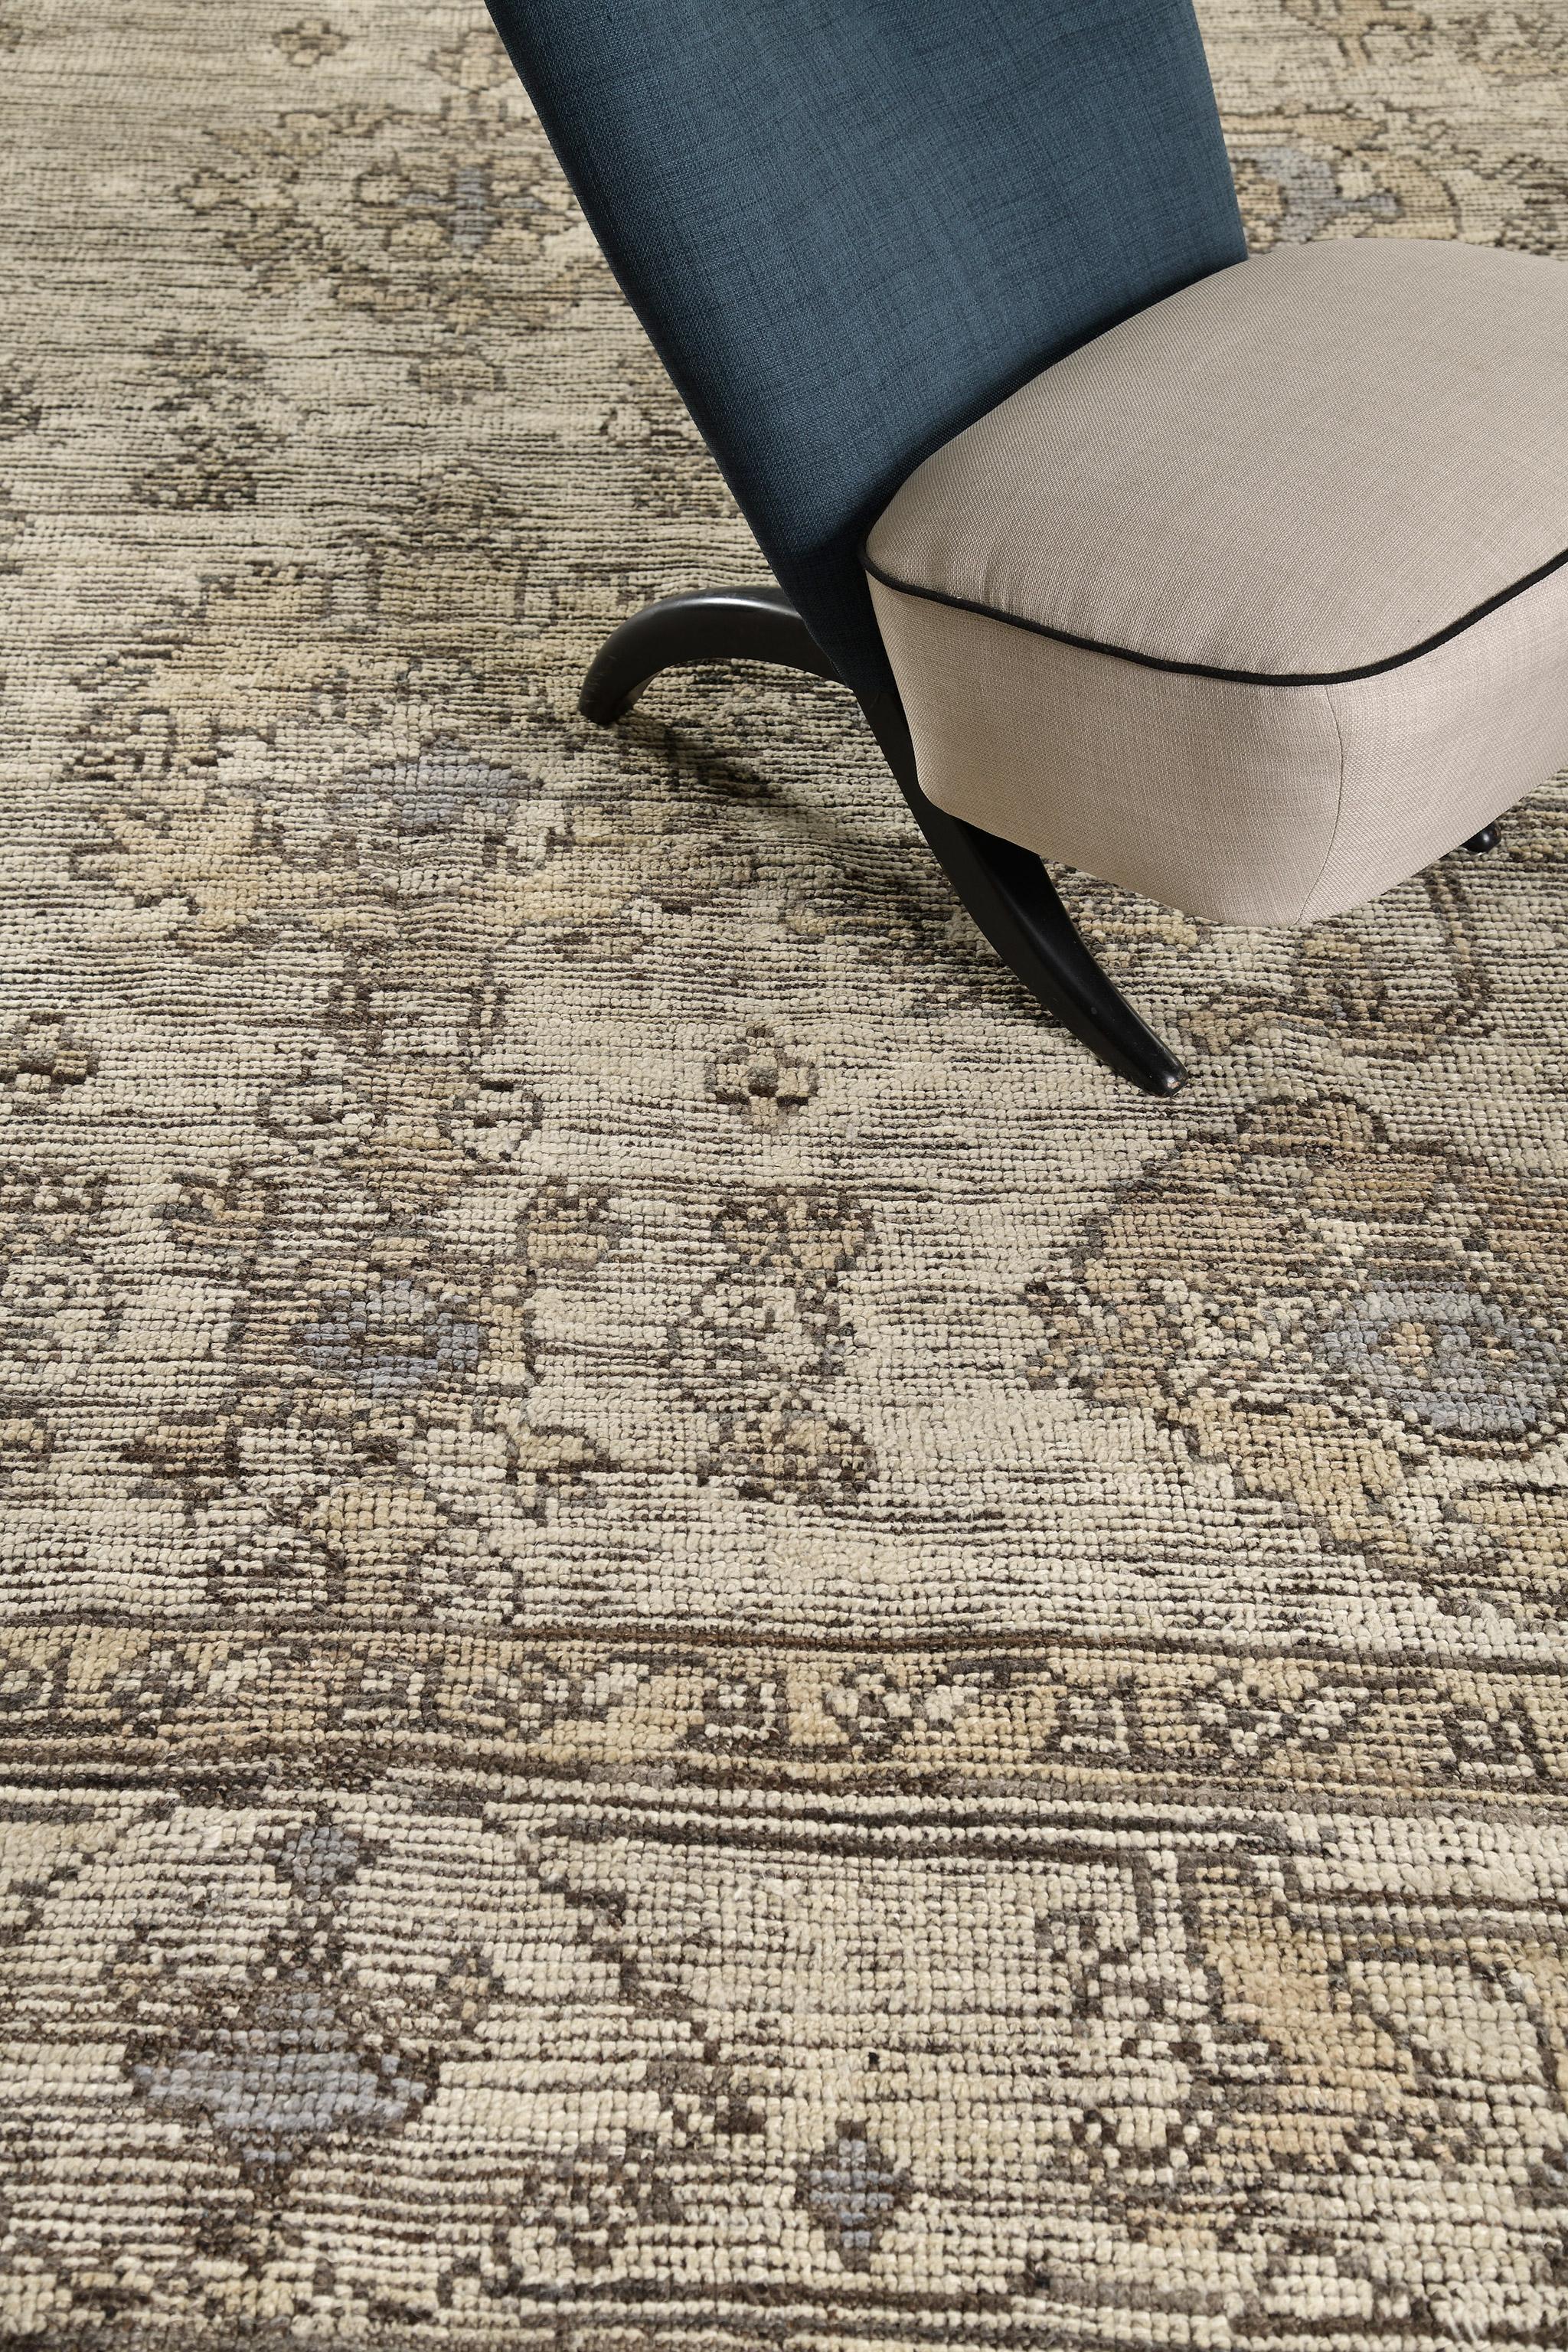 A captivating Oushak revival rug that is a magnificent translation of dainty sophistication. Distinctive palmettes, and florid patterns are showcasing remarkable radiance in the stunning shades of beige and camel enclosed by a fascinating